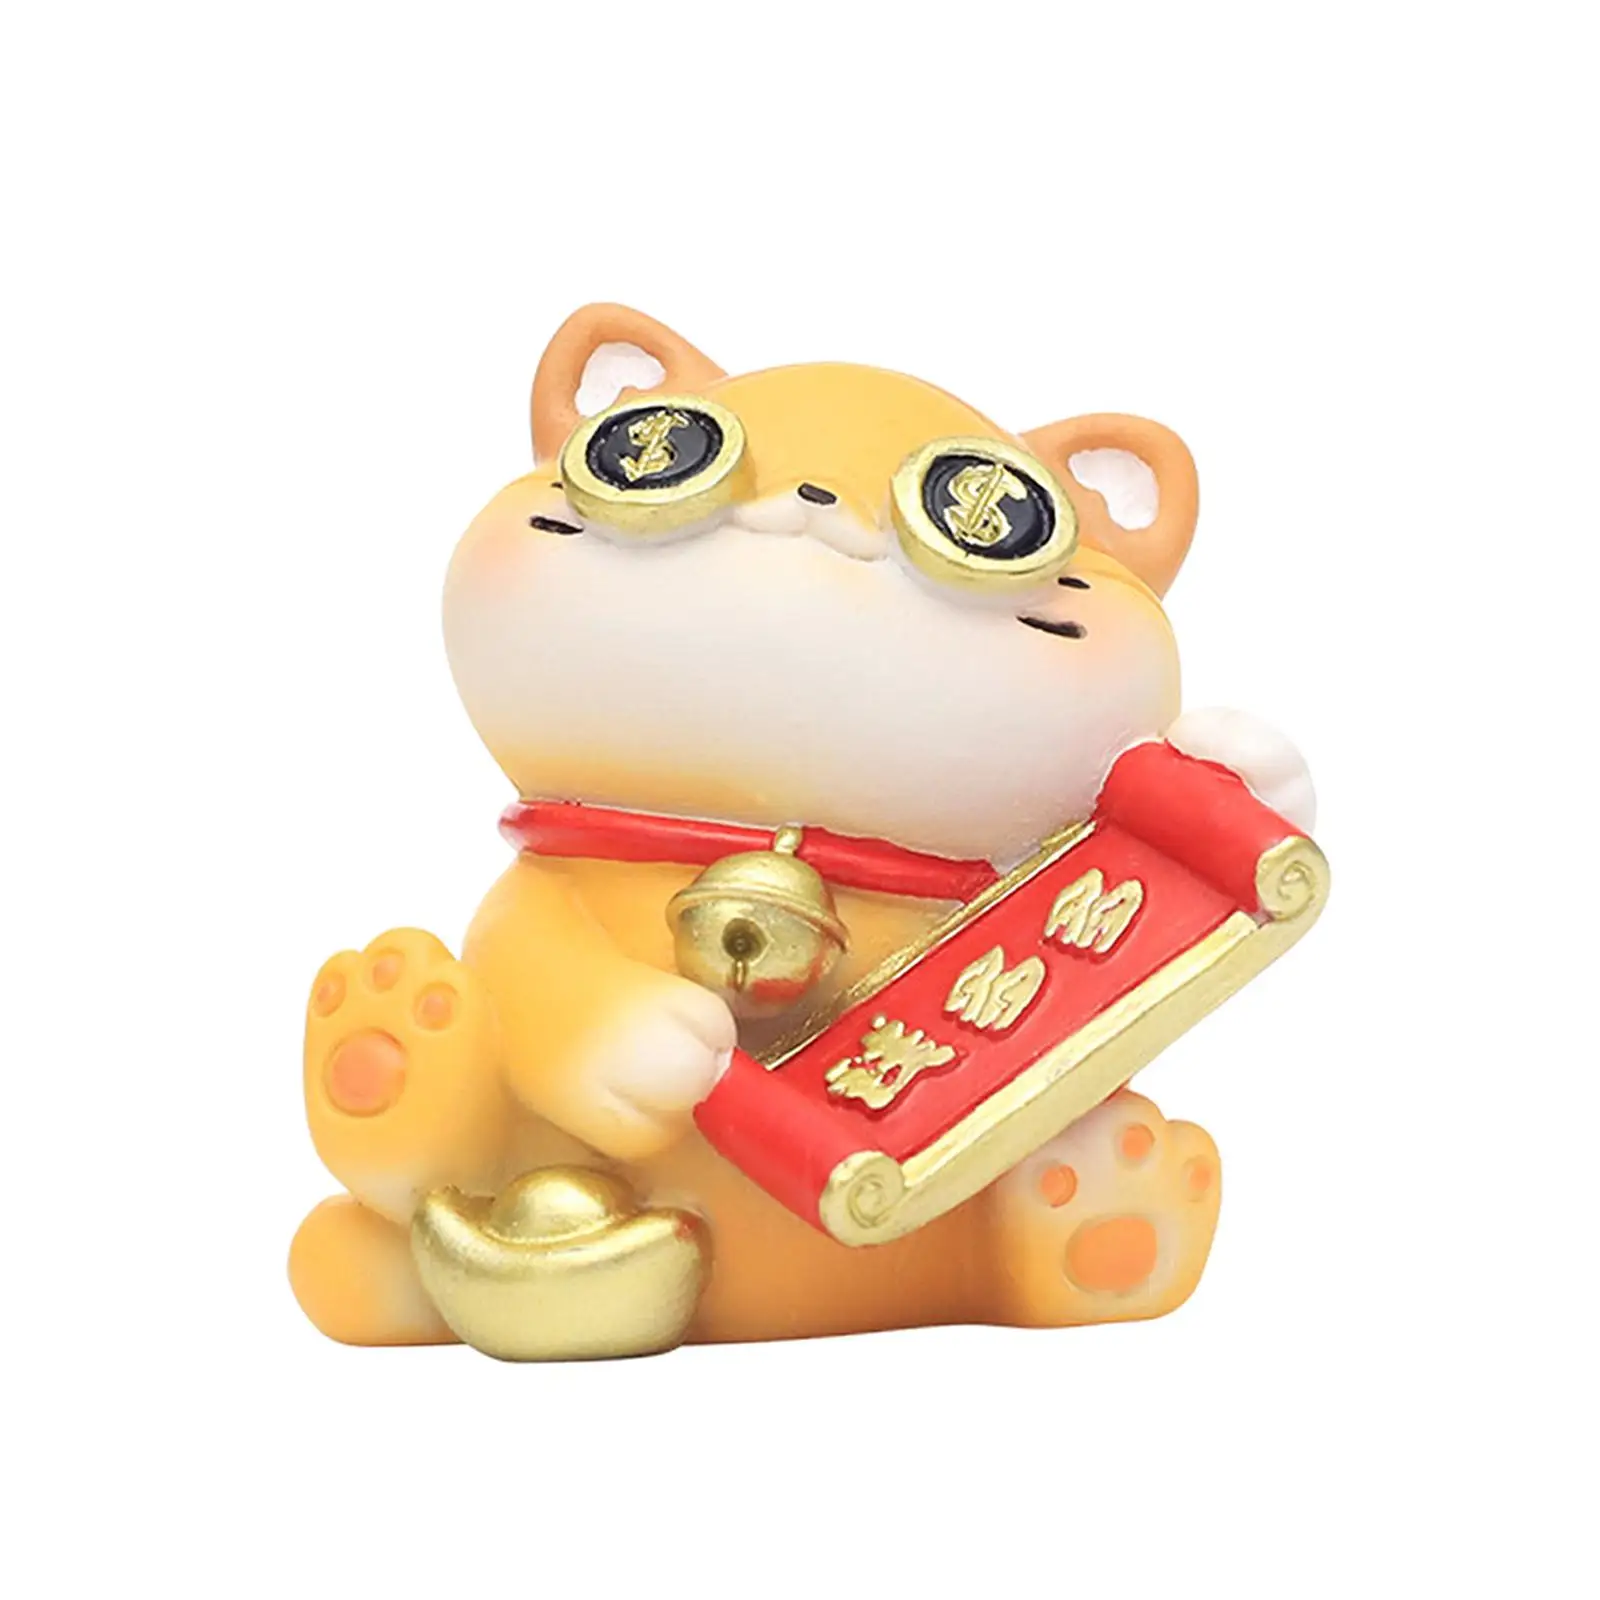 Lucky Cat Figurine Miniature Figurine Tabletop Ornament Animal Sculpture for Desk Living Room Fireplace Office New Year Gift